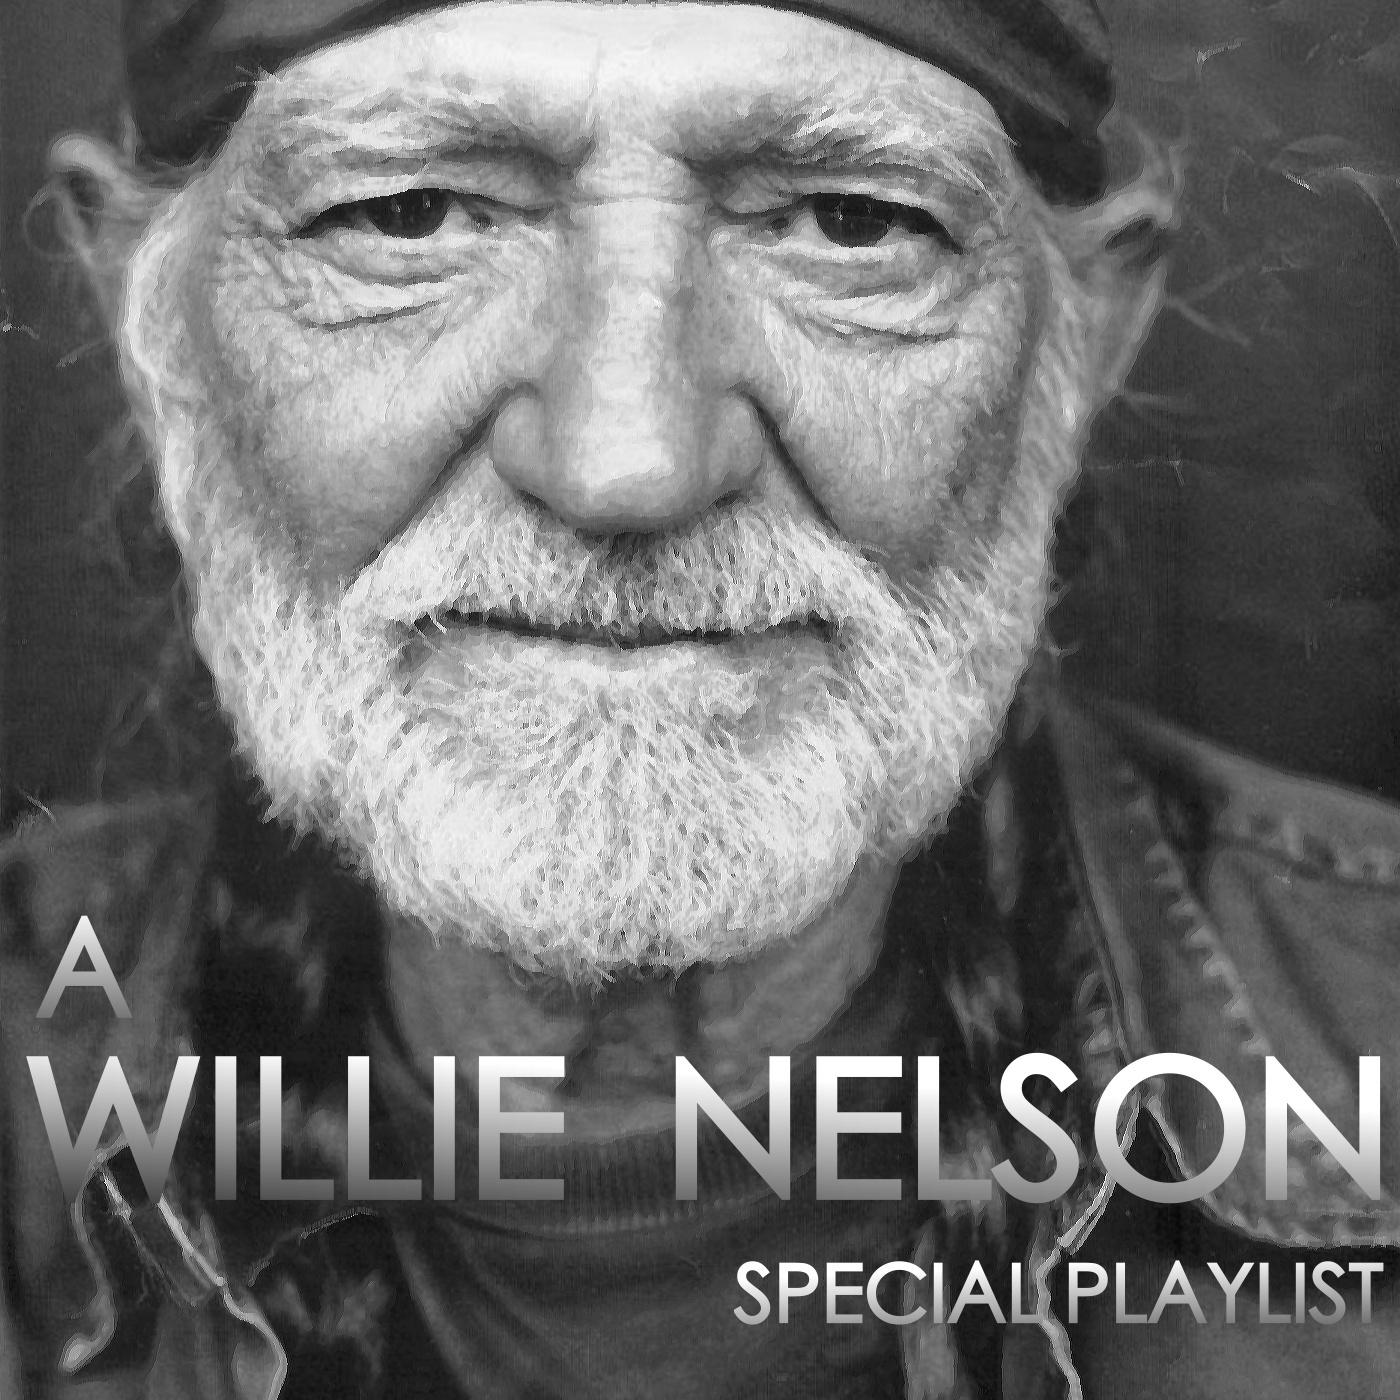 A Willie Nelson Special Playlist